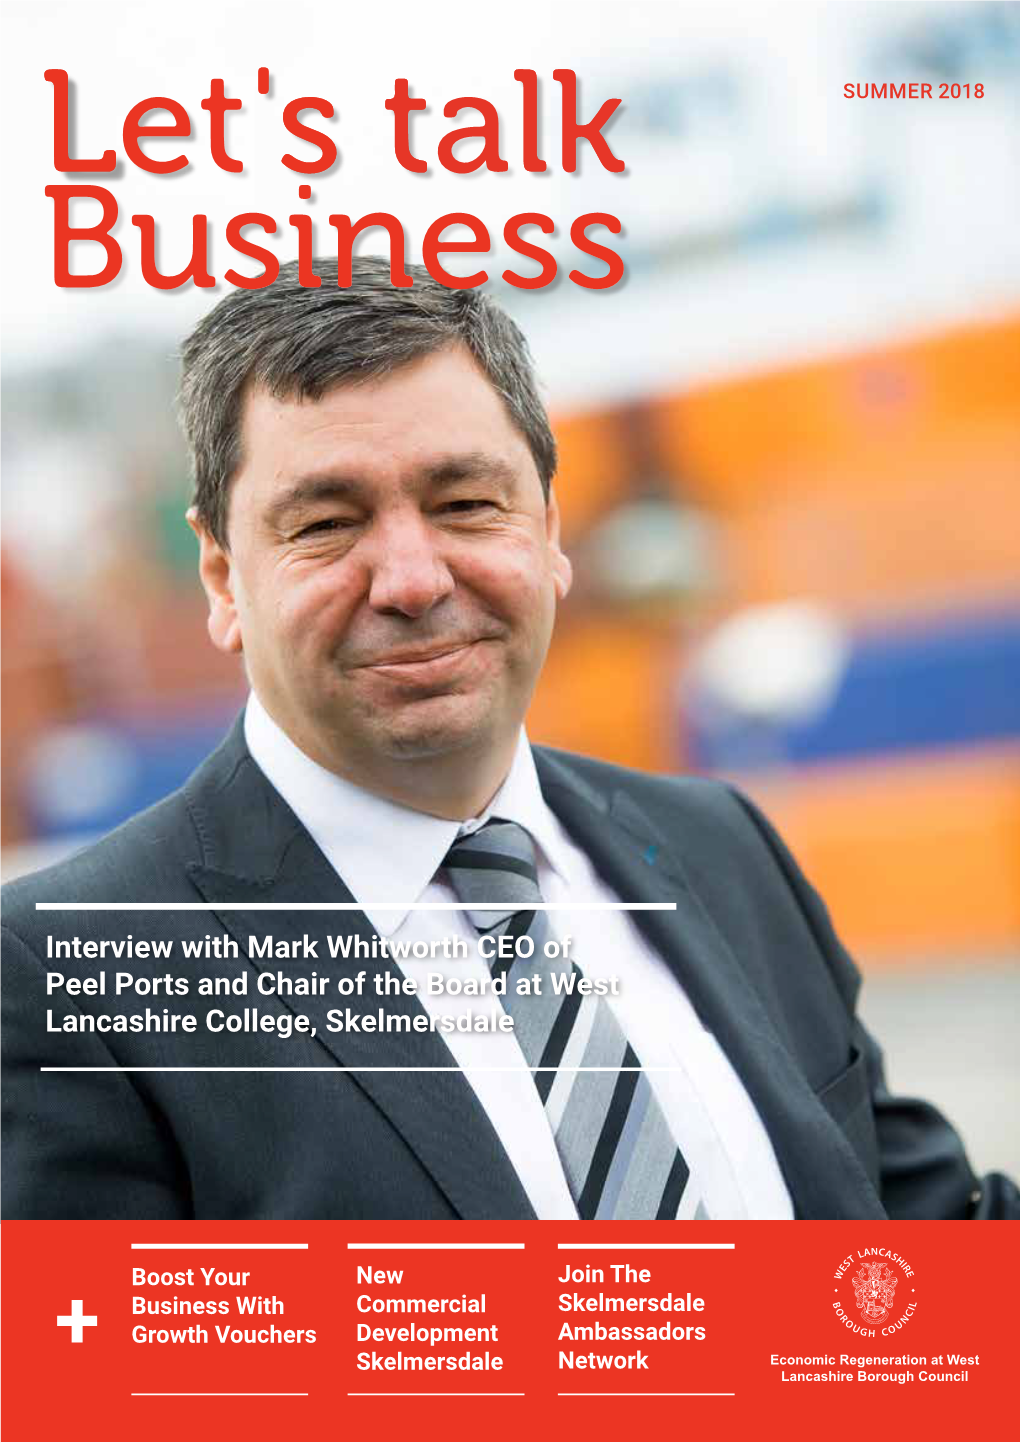 Interview with Mark Whitworth CEO of Peel Ports and Chair of the Board at West Lancashire College, Skelmersdale